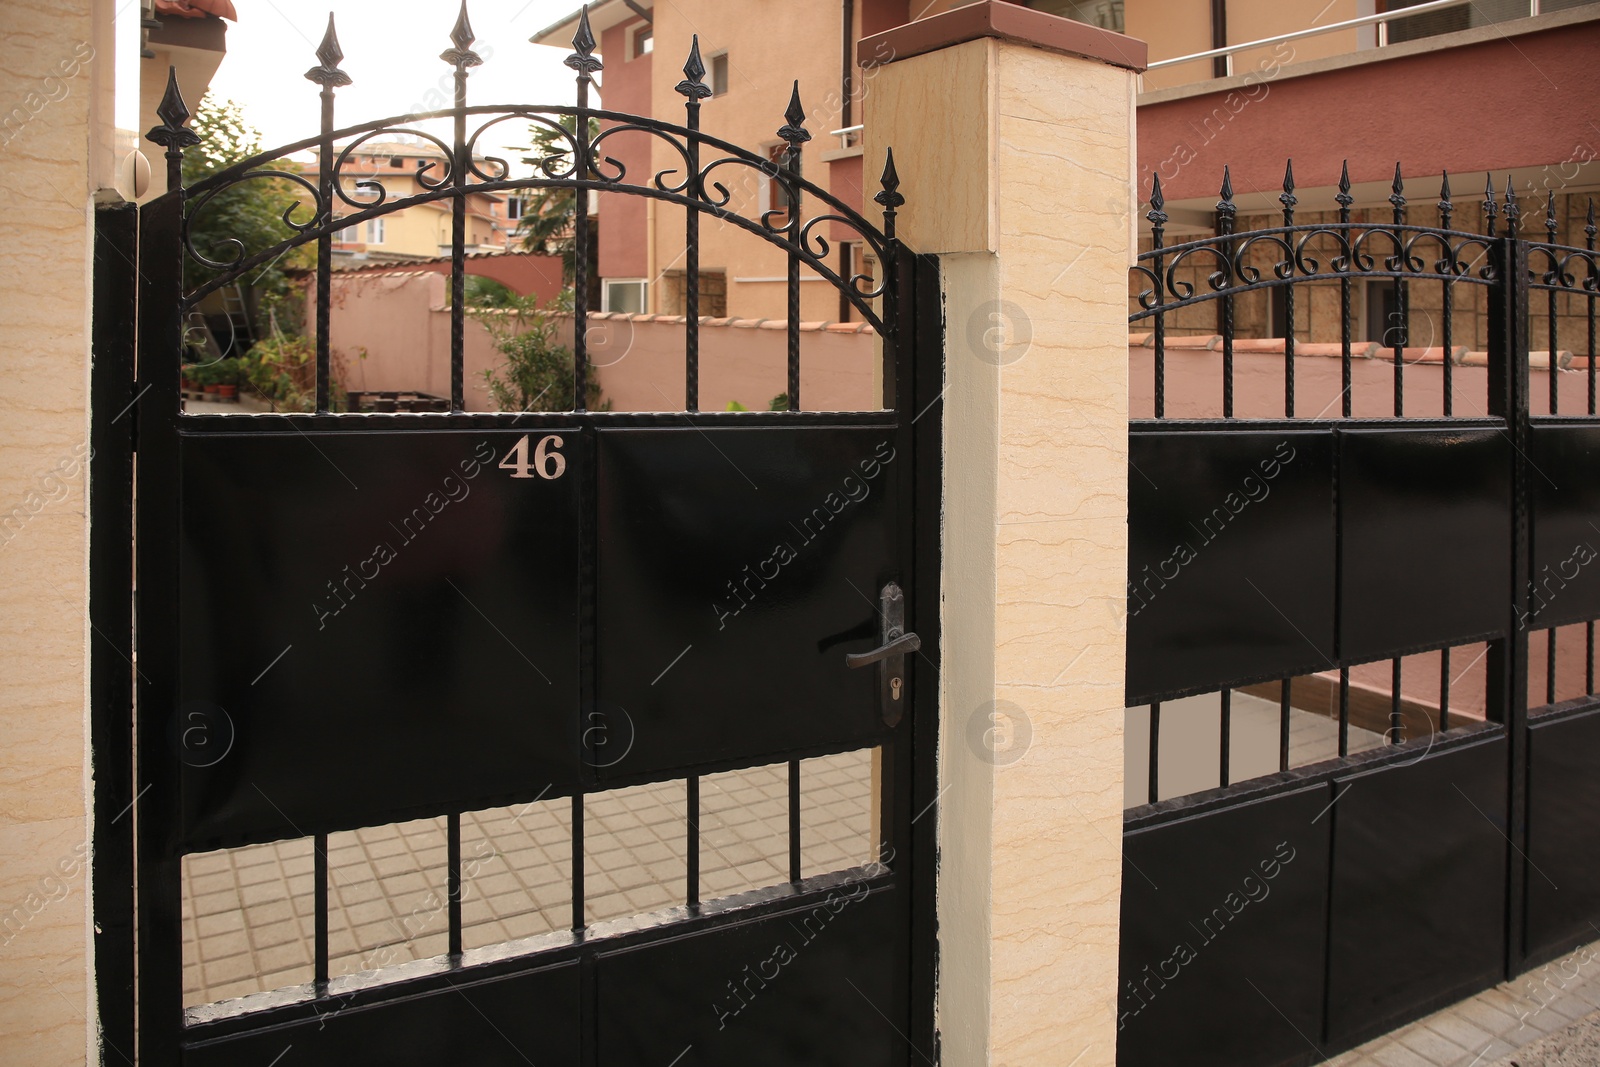 Photo of Plate with house number 46 on metal fence